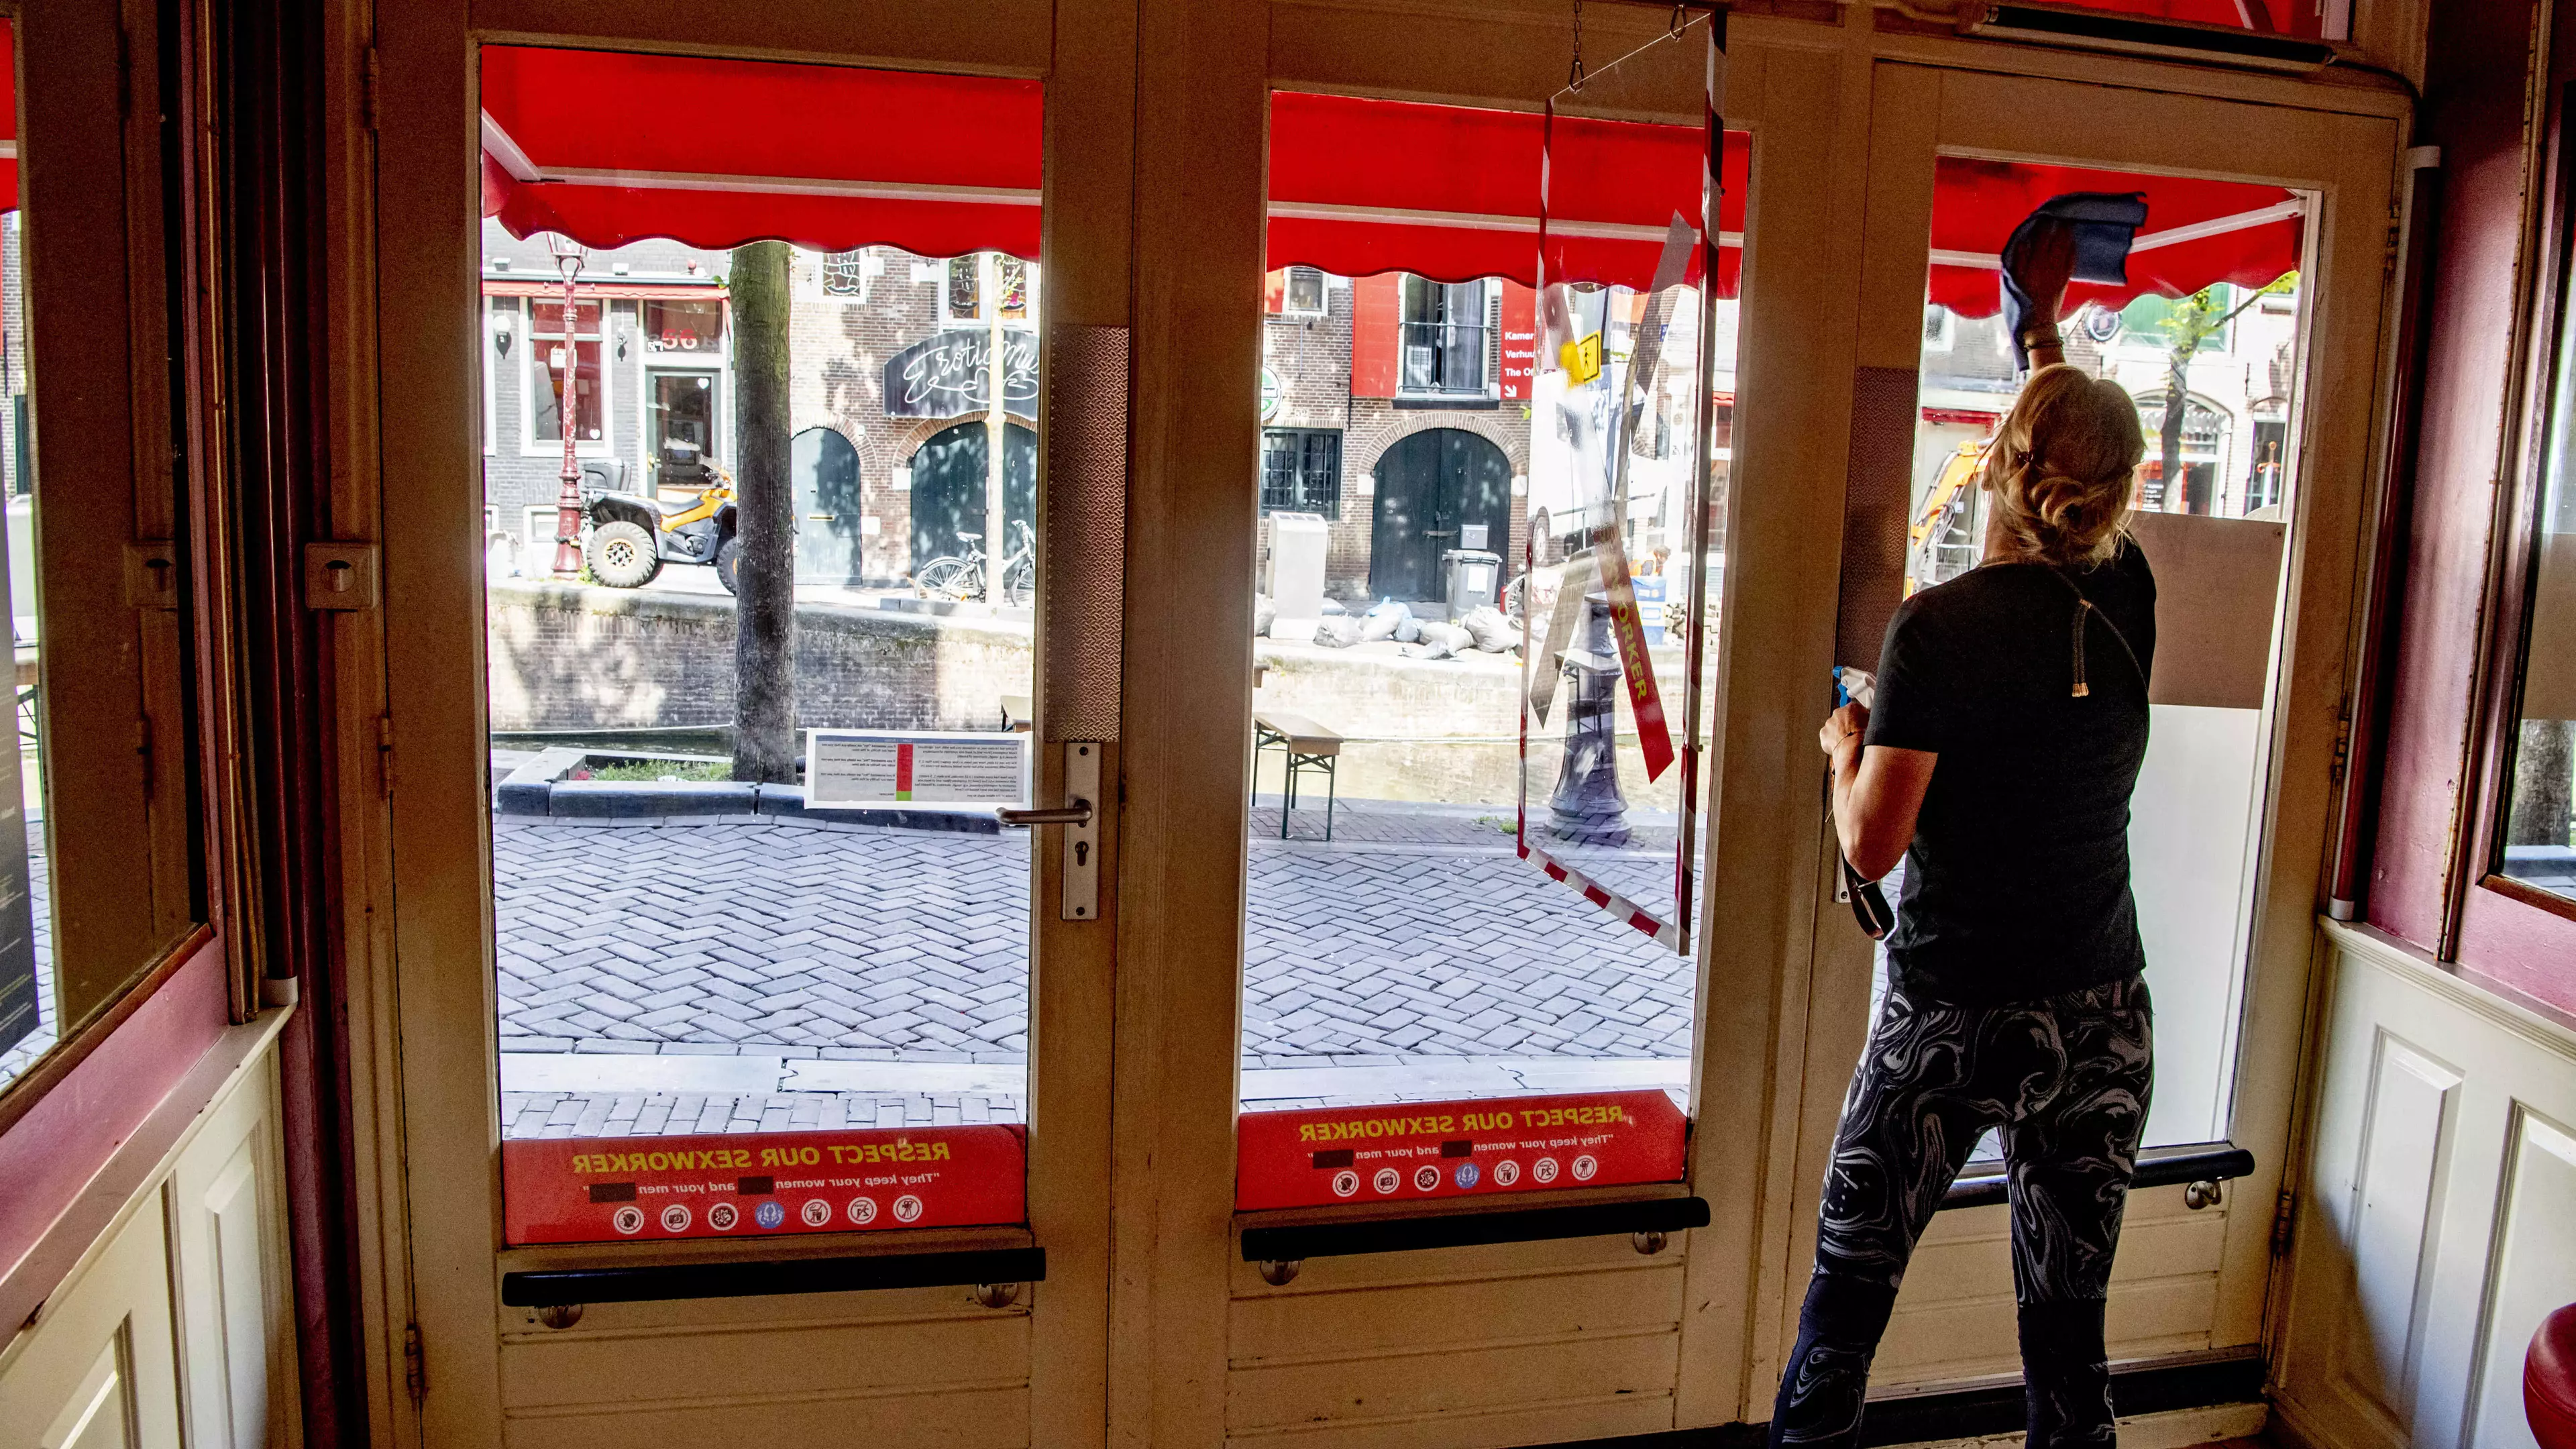 Amsterdam's Red Light District Reopens Following Lockdown